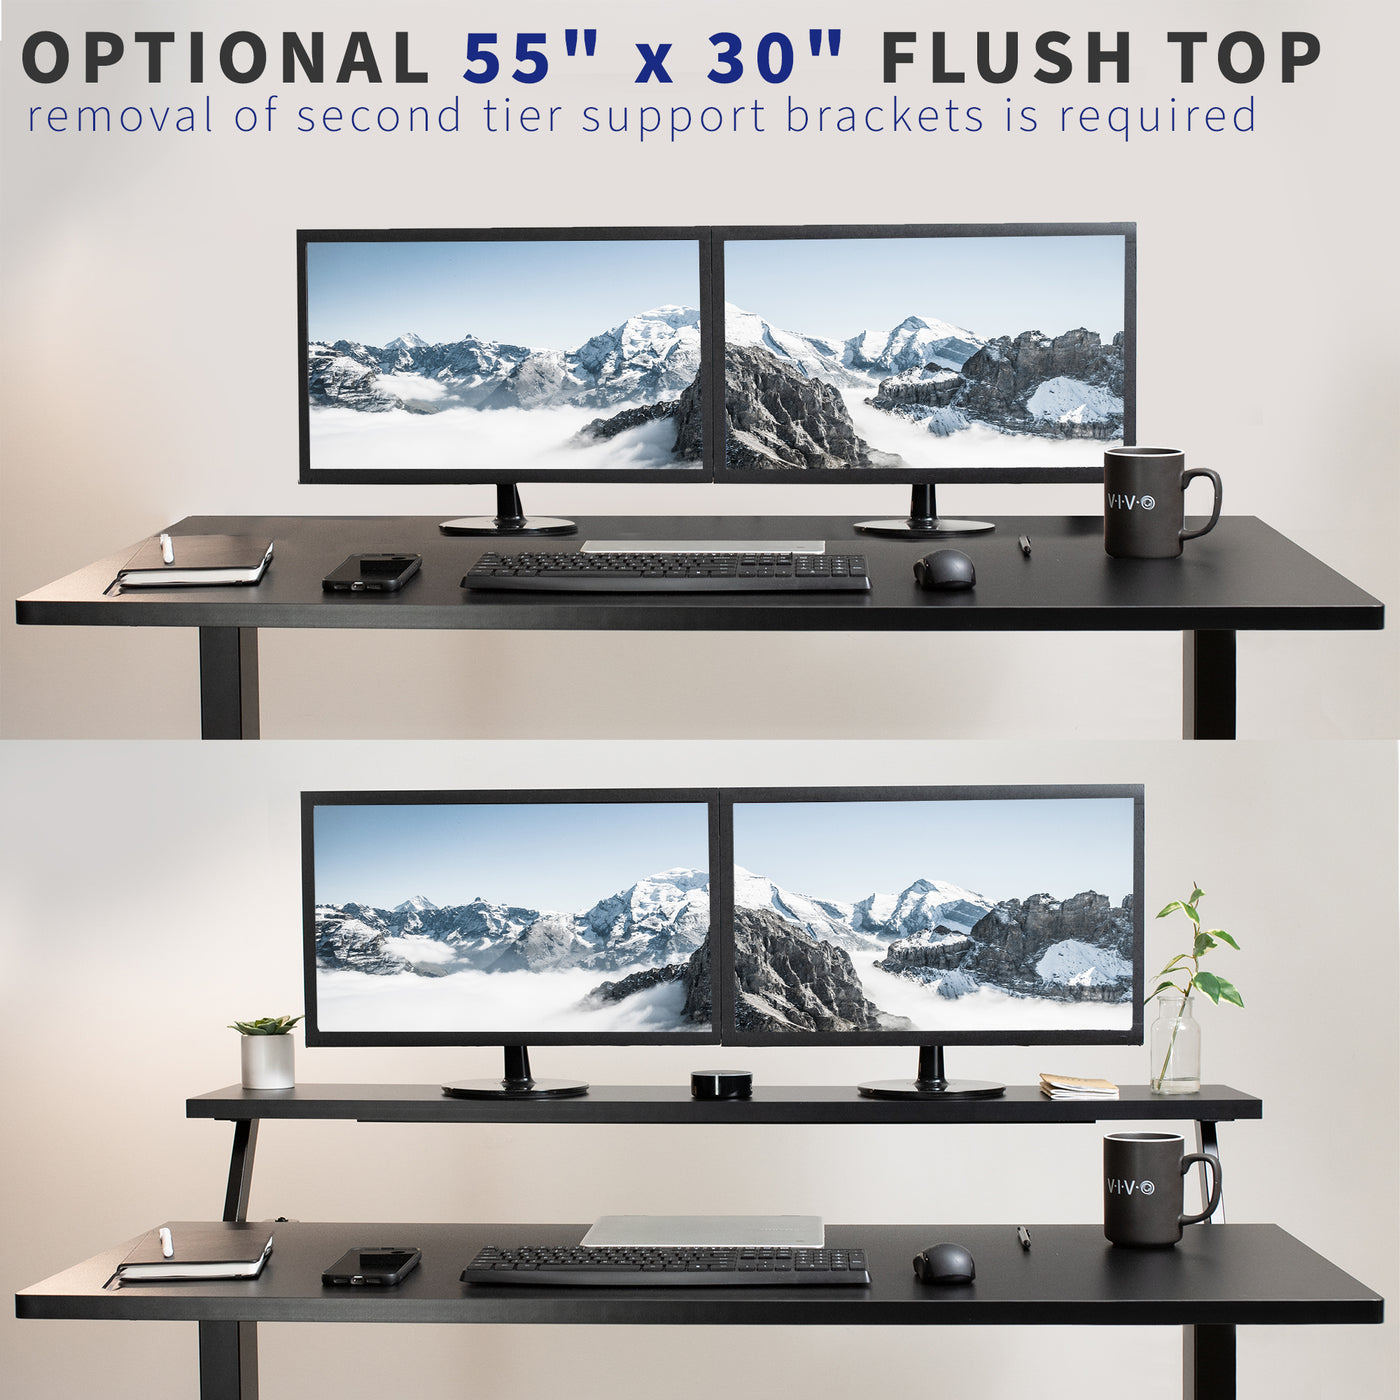 The split top of the desk can also run flush with desktop.